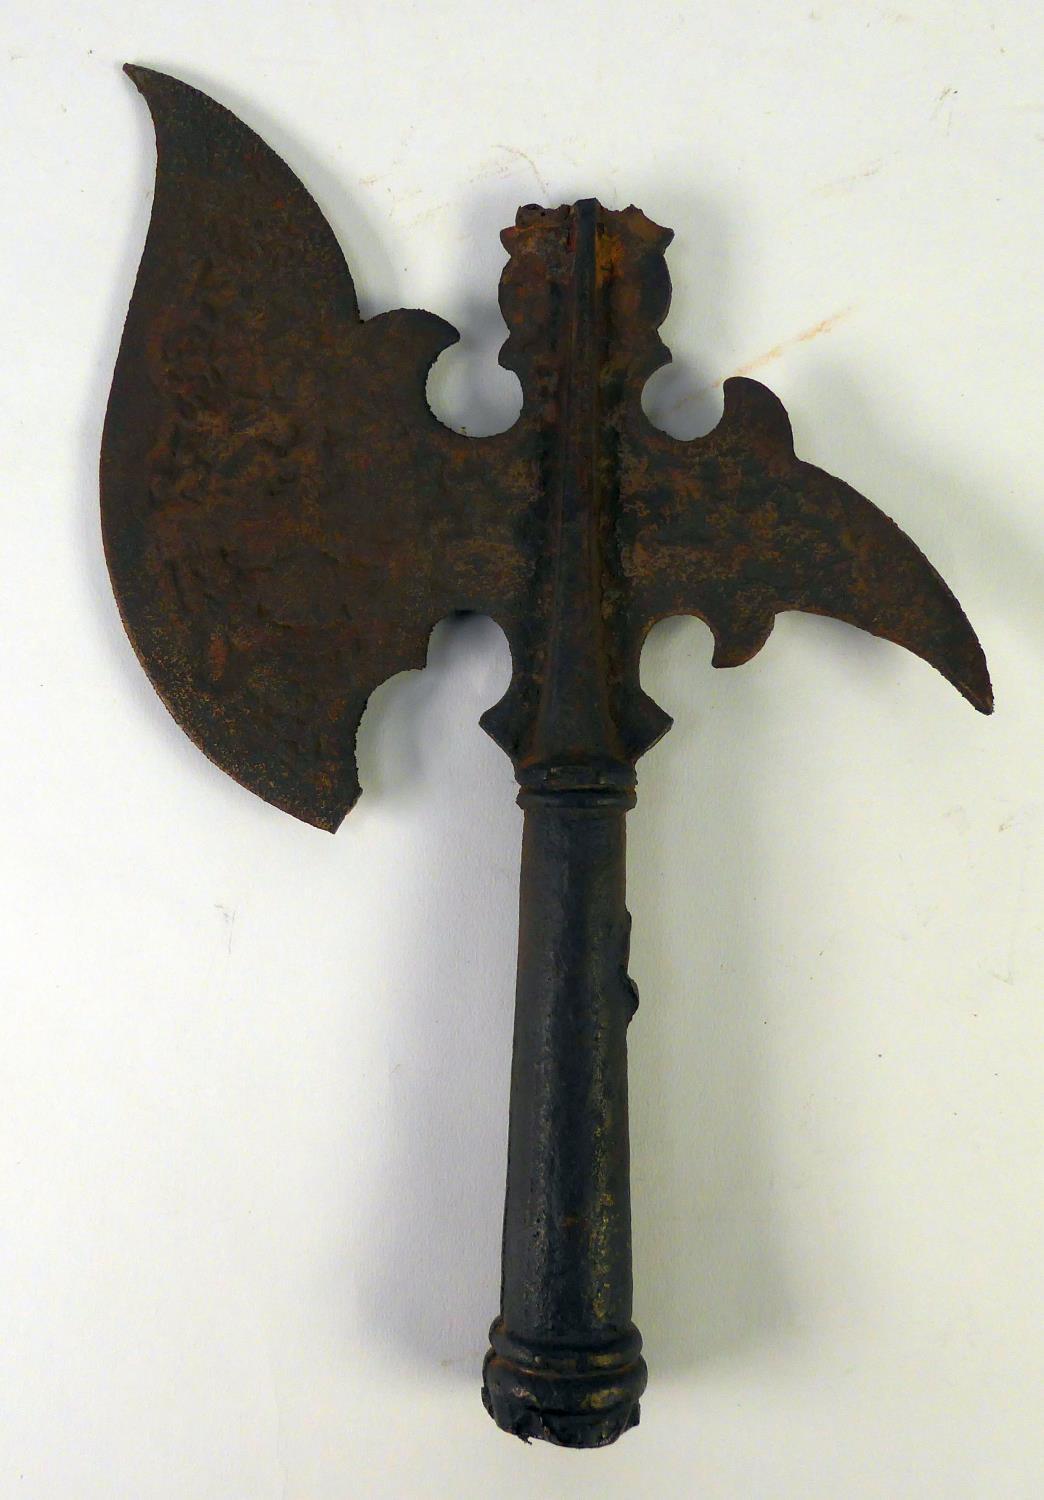 ANTIQUE CAST AND CHASED METAL ORNATE BATTLE AXE HEAD (a.f.)